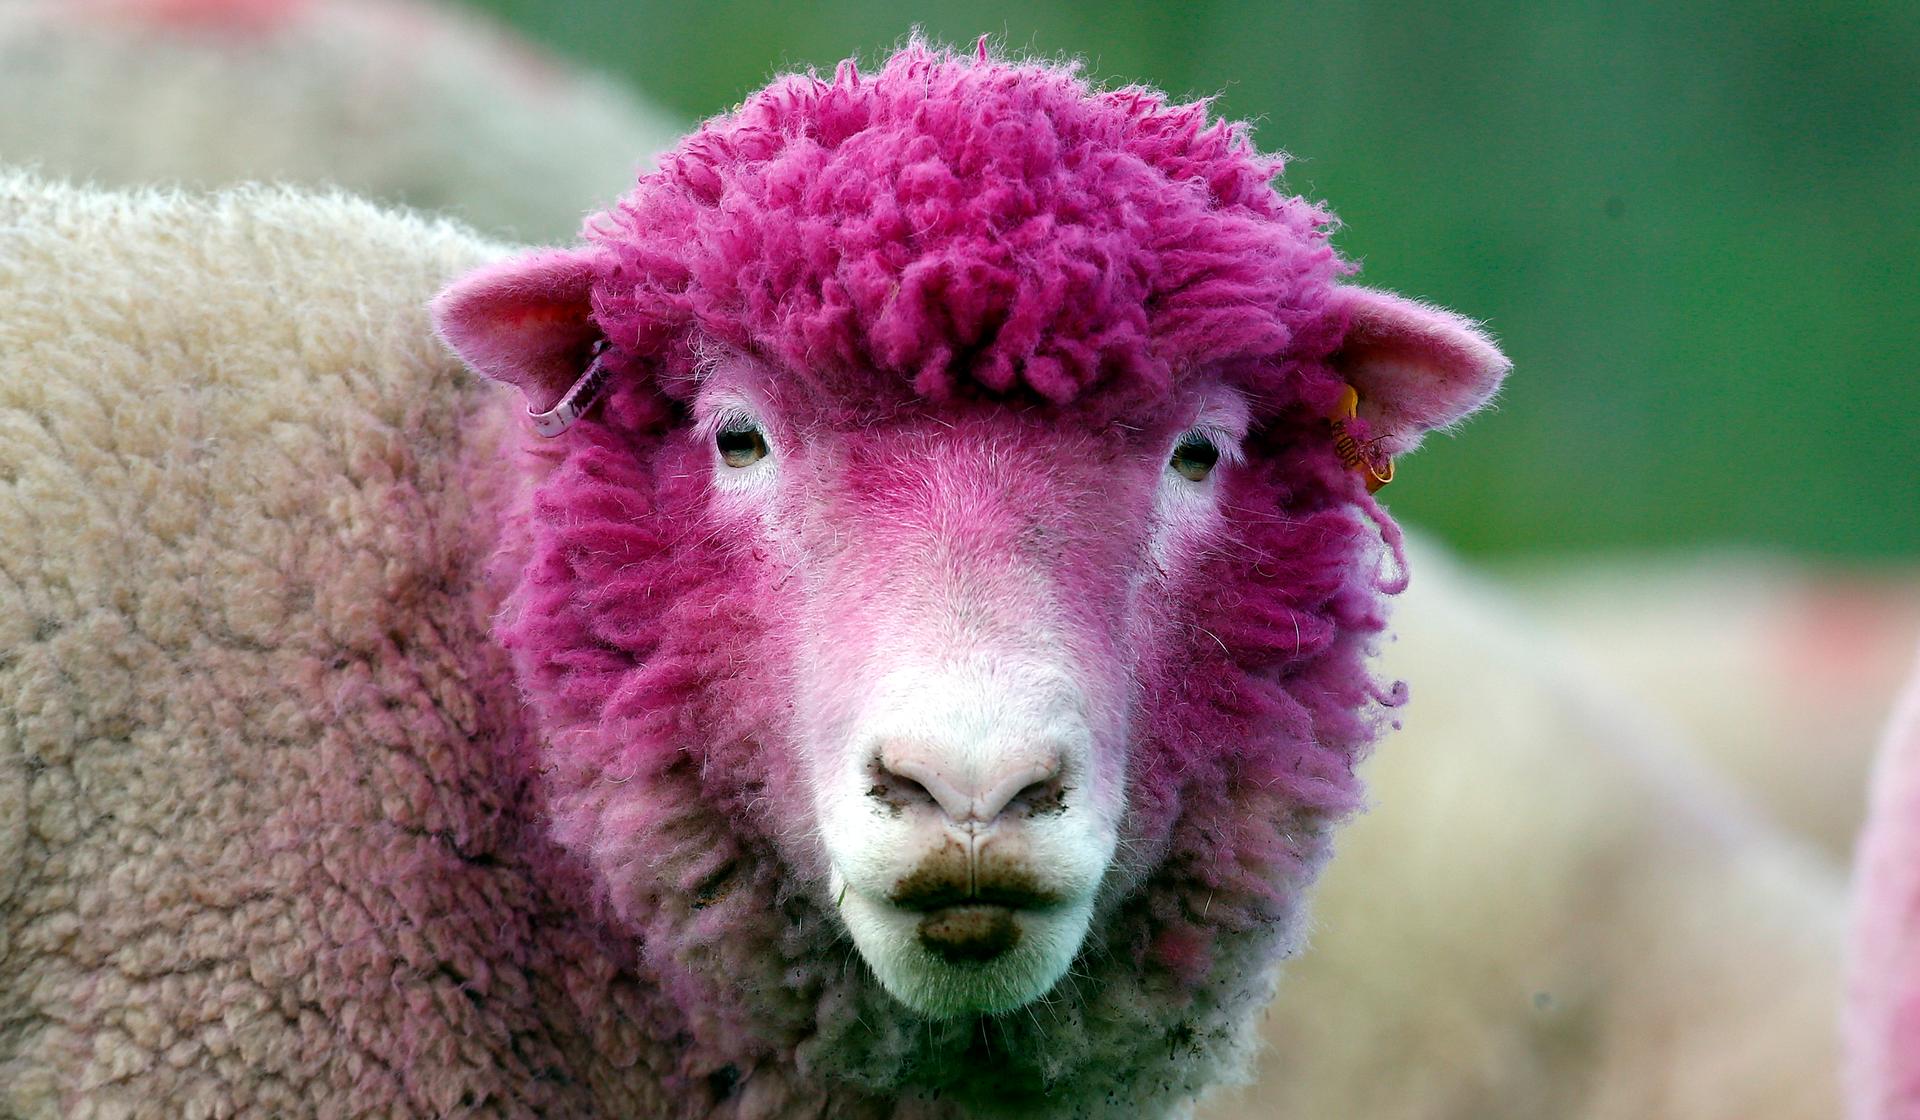 A sheep with dyed pink wool grazes in a field near the village of Balintoy. It's been painted pink to welcome the arrival of the Giro d'Italia cycle race whose race leader wears a pink jersey.